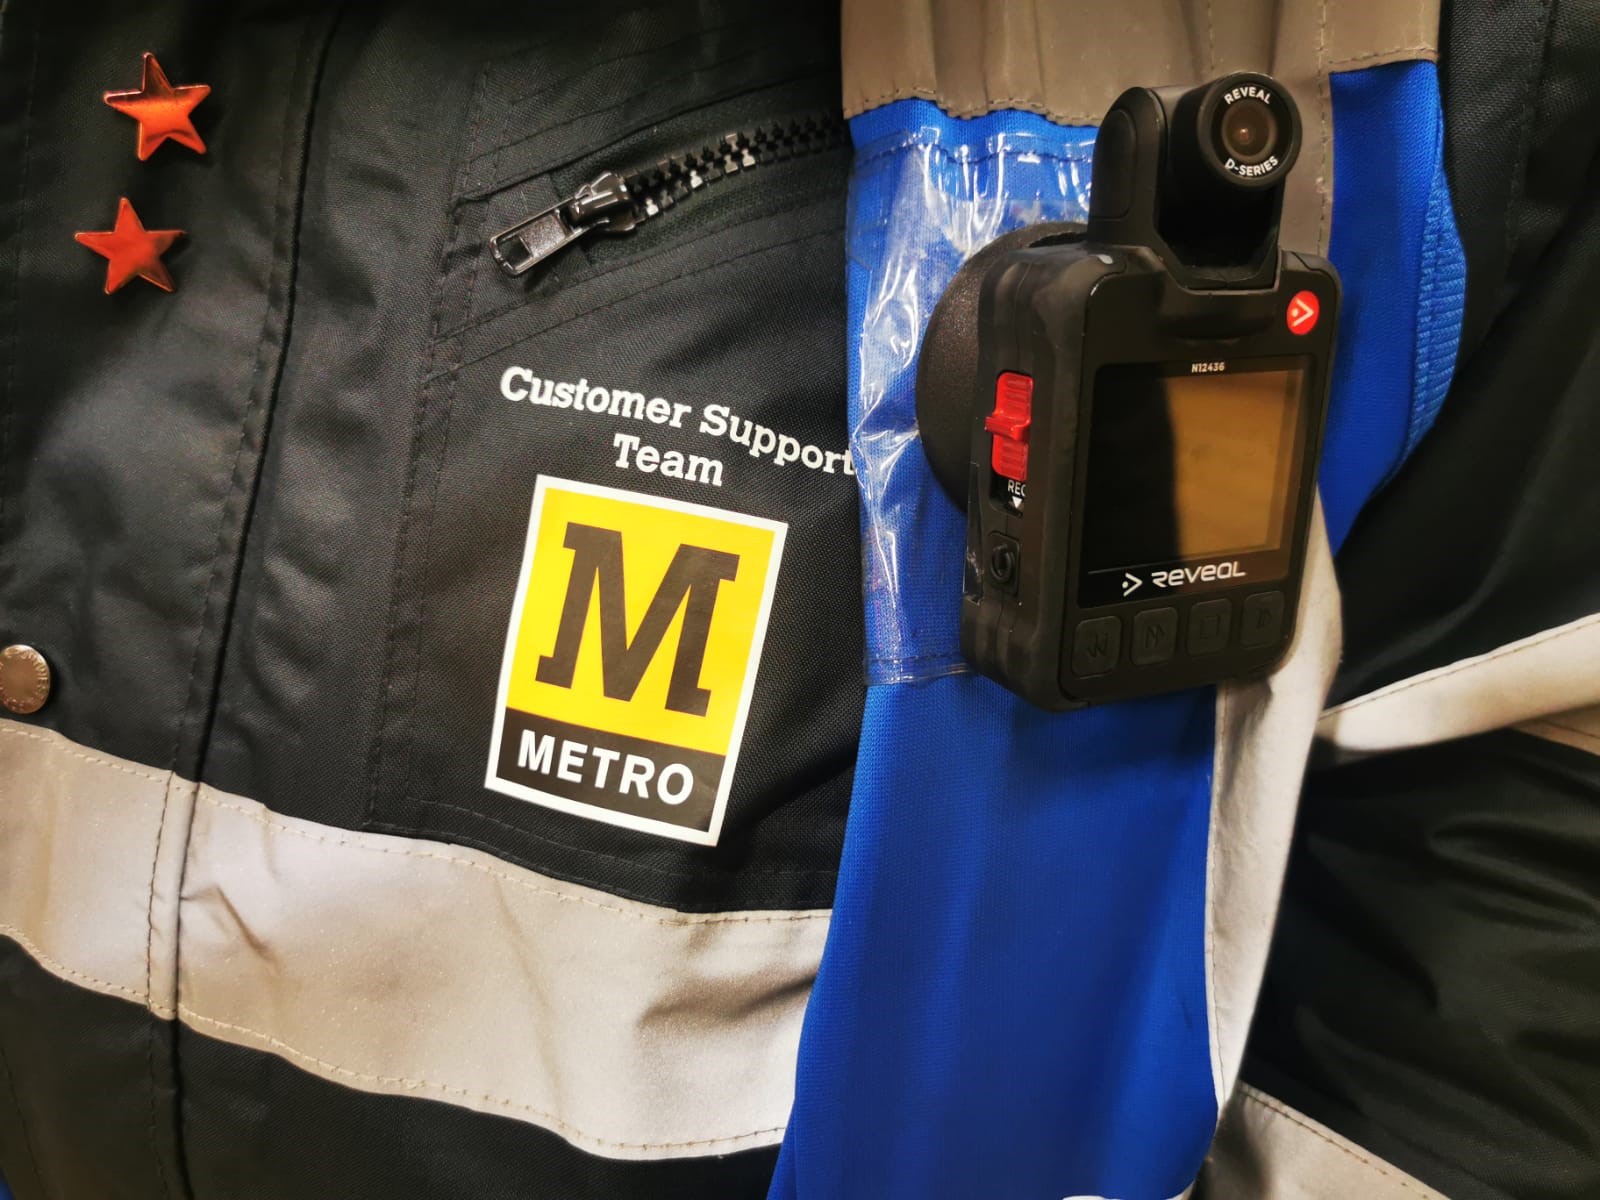 Body cams rolled out for north east transport staff